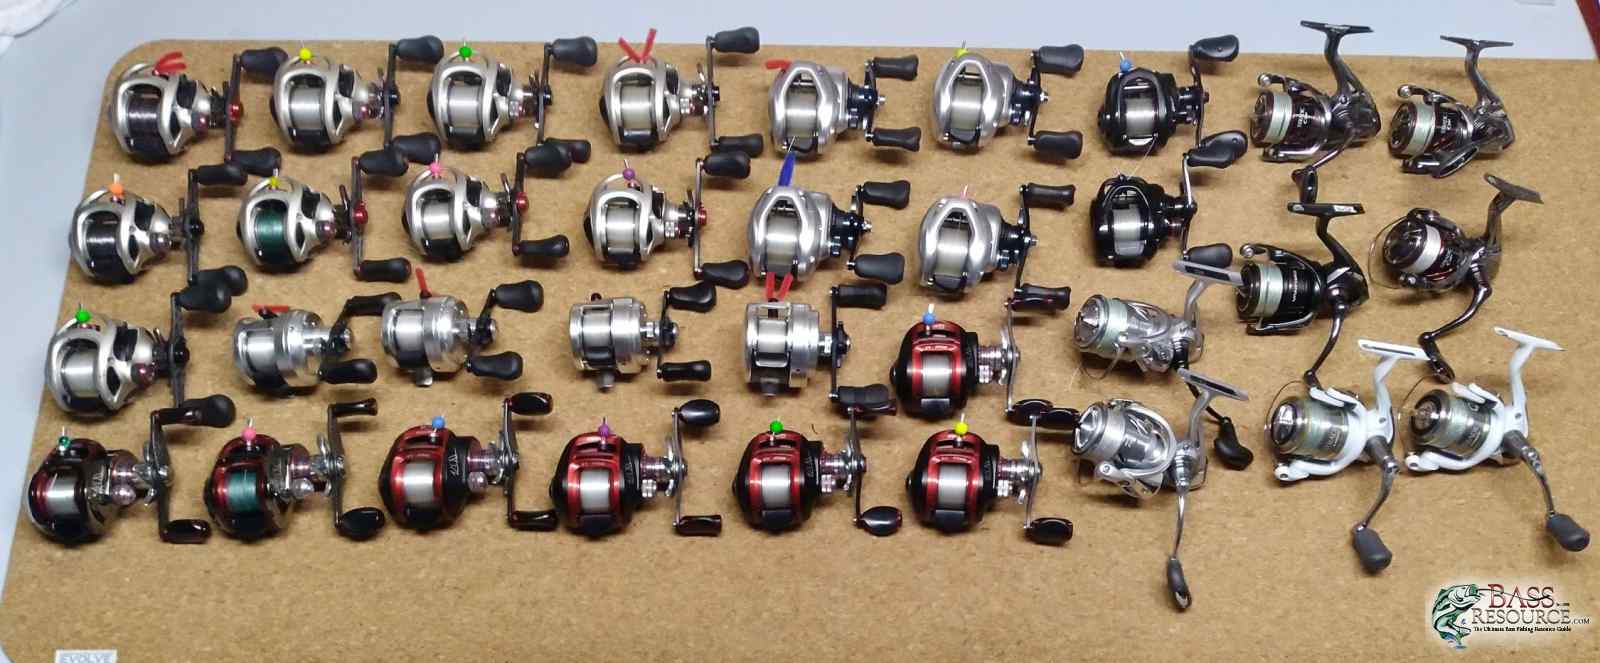 you all ever talk about Quantum reels? - Fishing Rods, Reels, Line, and  Knots - Bass Fishing Forums